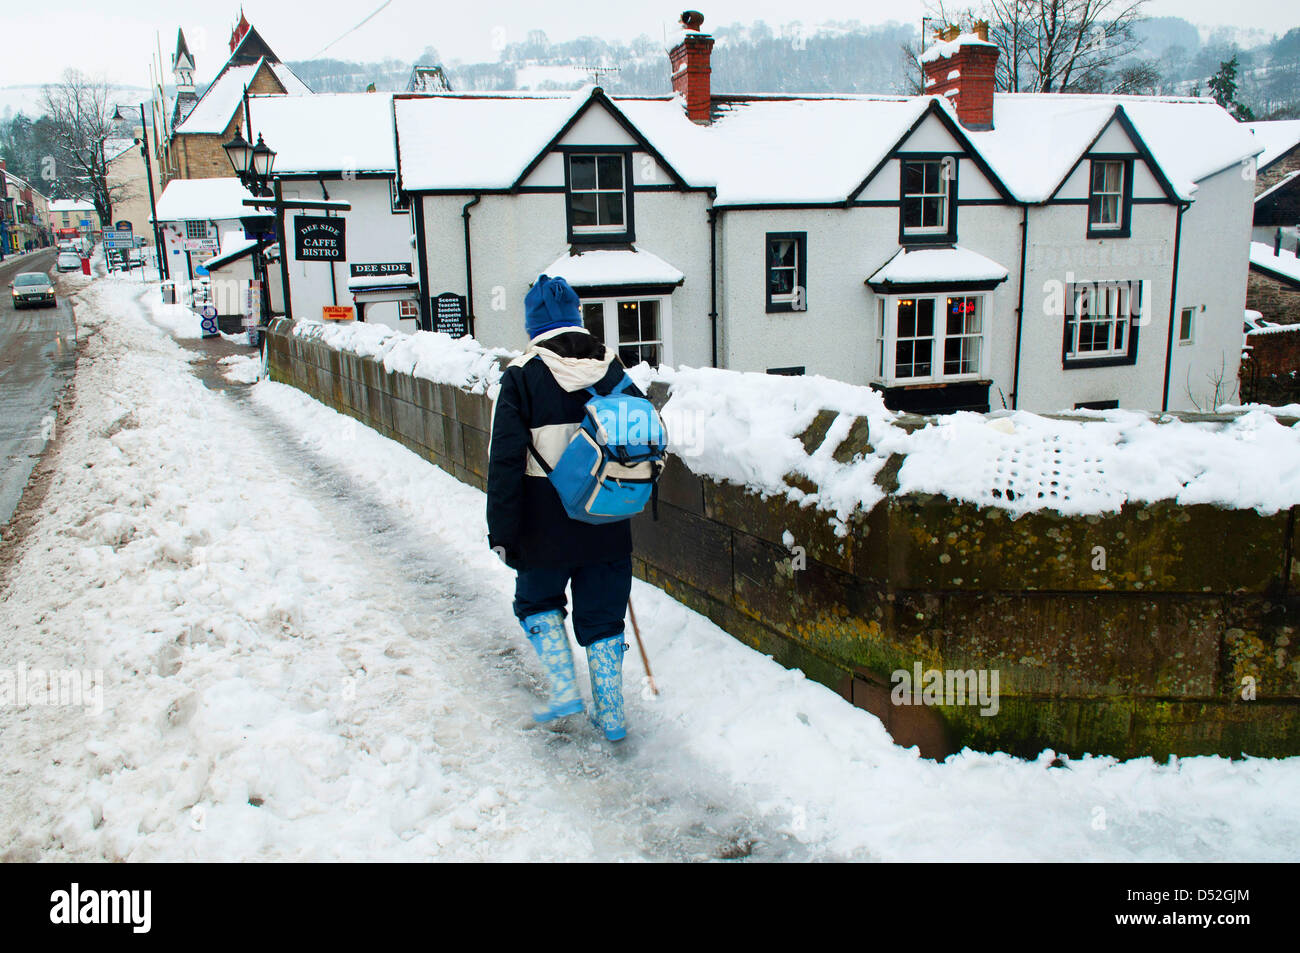 22nd March 2013. Llangollen, Wales, UK. Trees were blown down blocking roads and heavy snow up to 20cms in places disrupted traffic in North Wales last night and today. Photo Credit: GRAHAM M LAWRENCE/Alamy Live News. Stock Photo